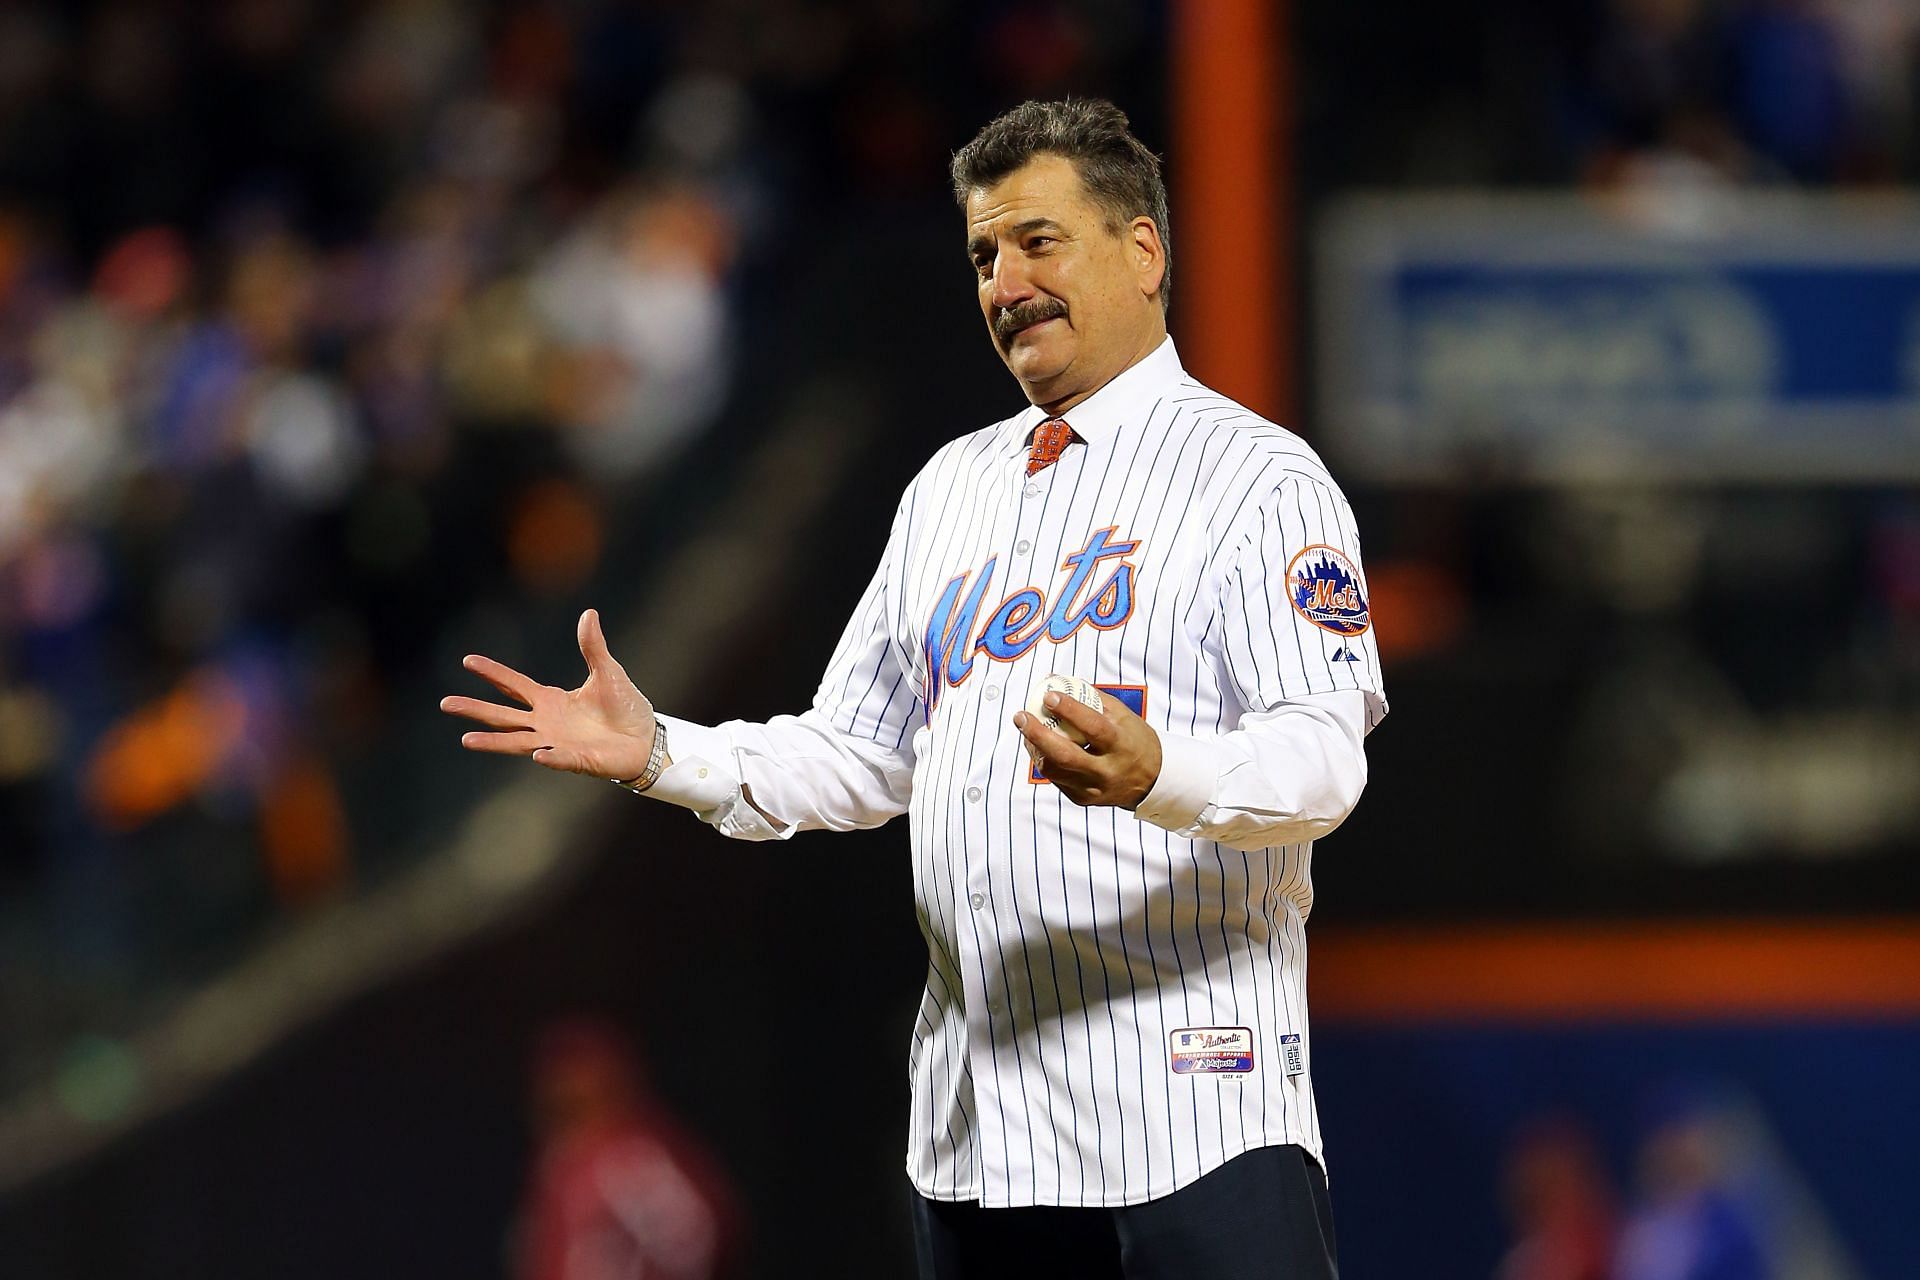 Former Major League Baseball first baseman Keith Hernandez gets readt to throw out the first pitch at Citi Field